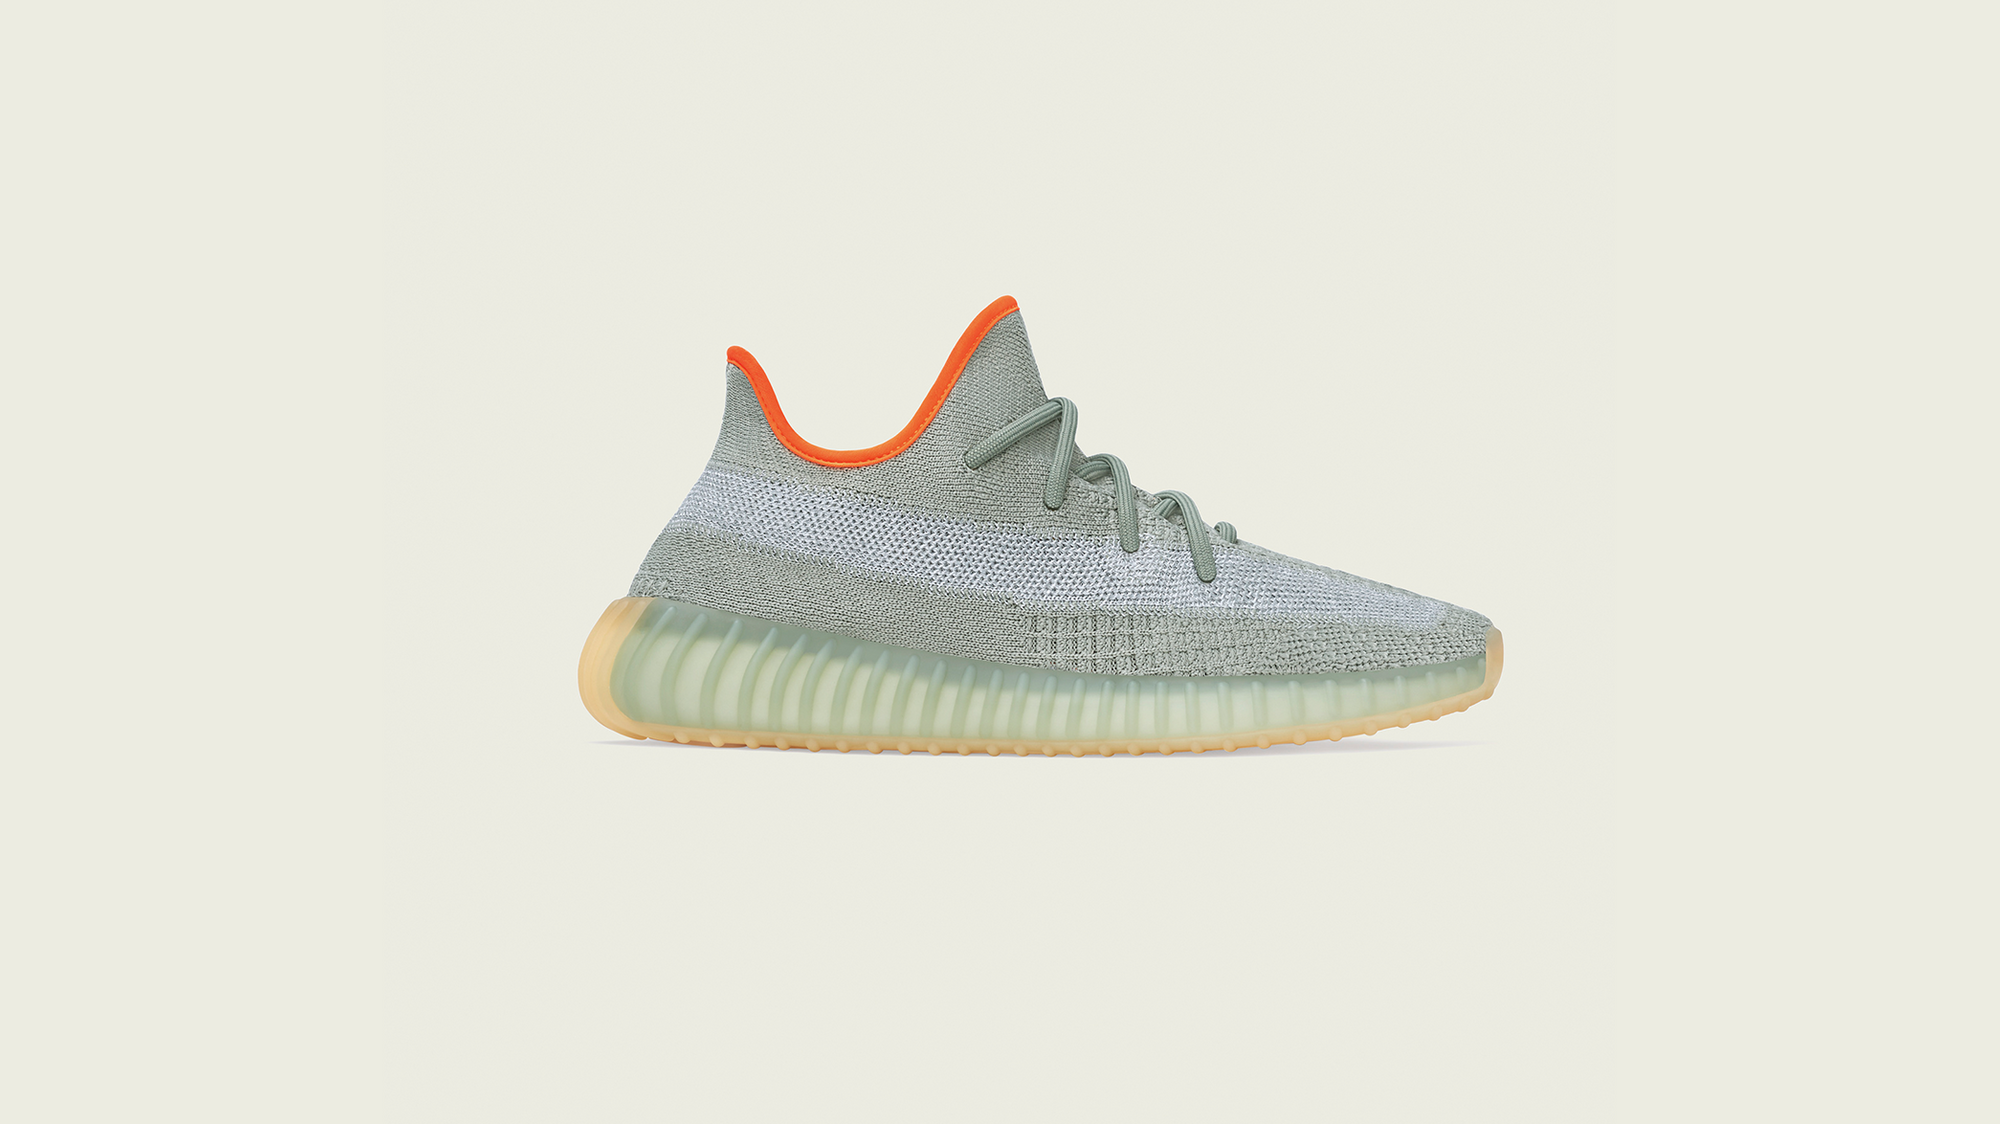 Where To Buy The Adidas Yeezy Boost 350 V2 “Desert Sage”